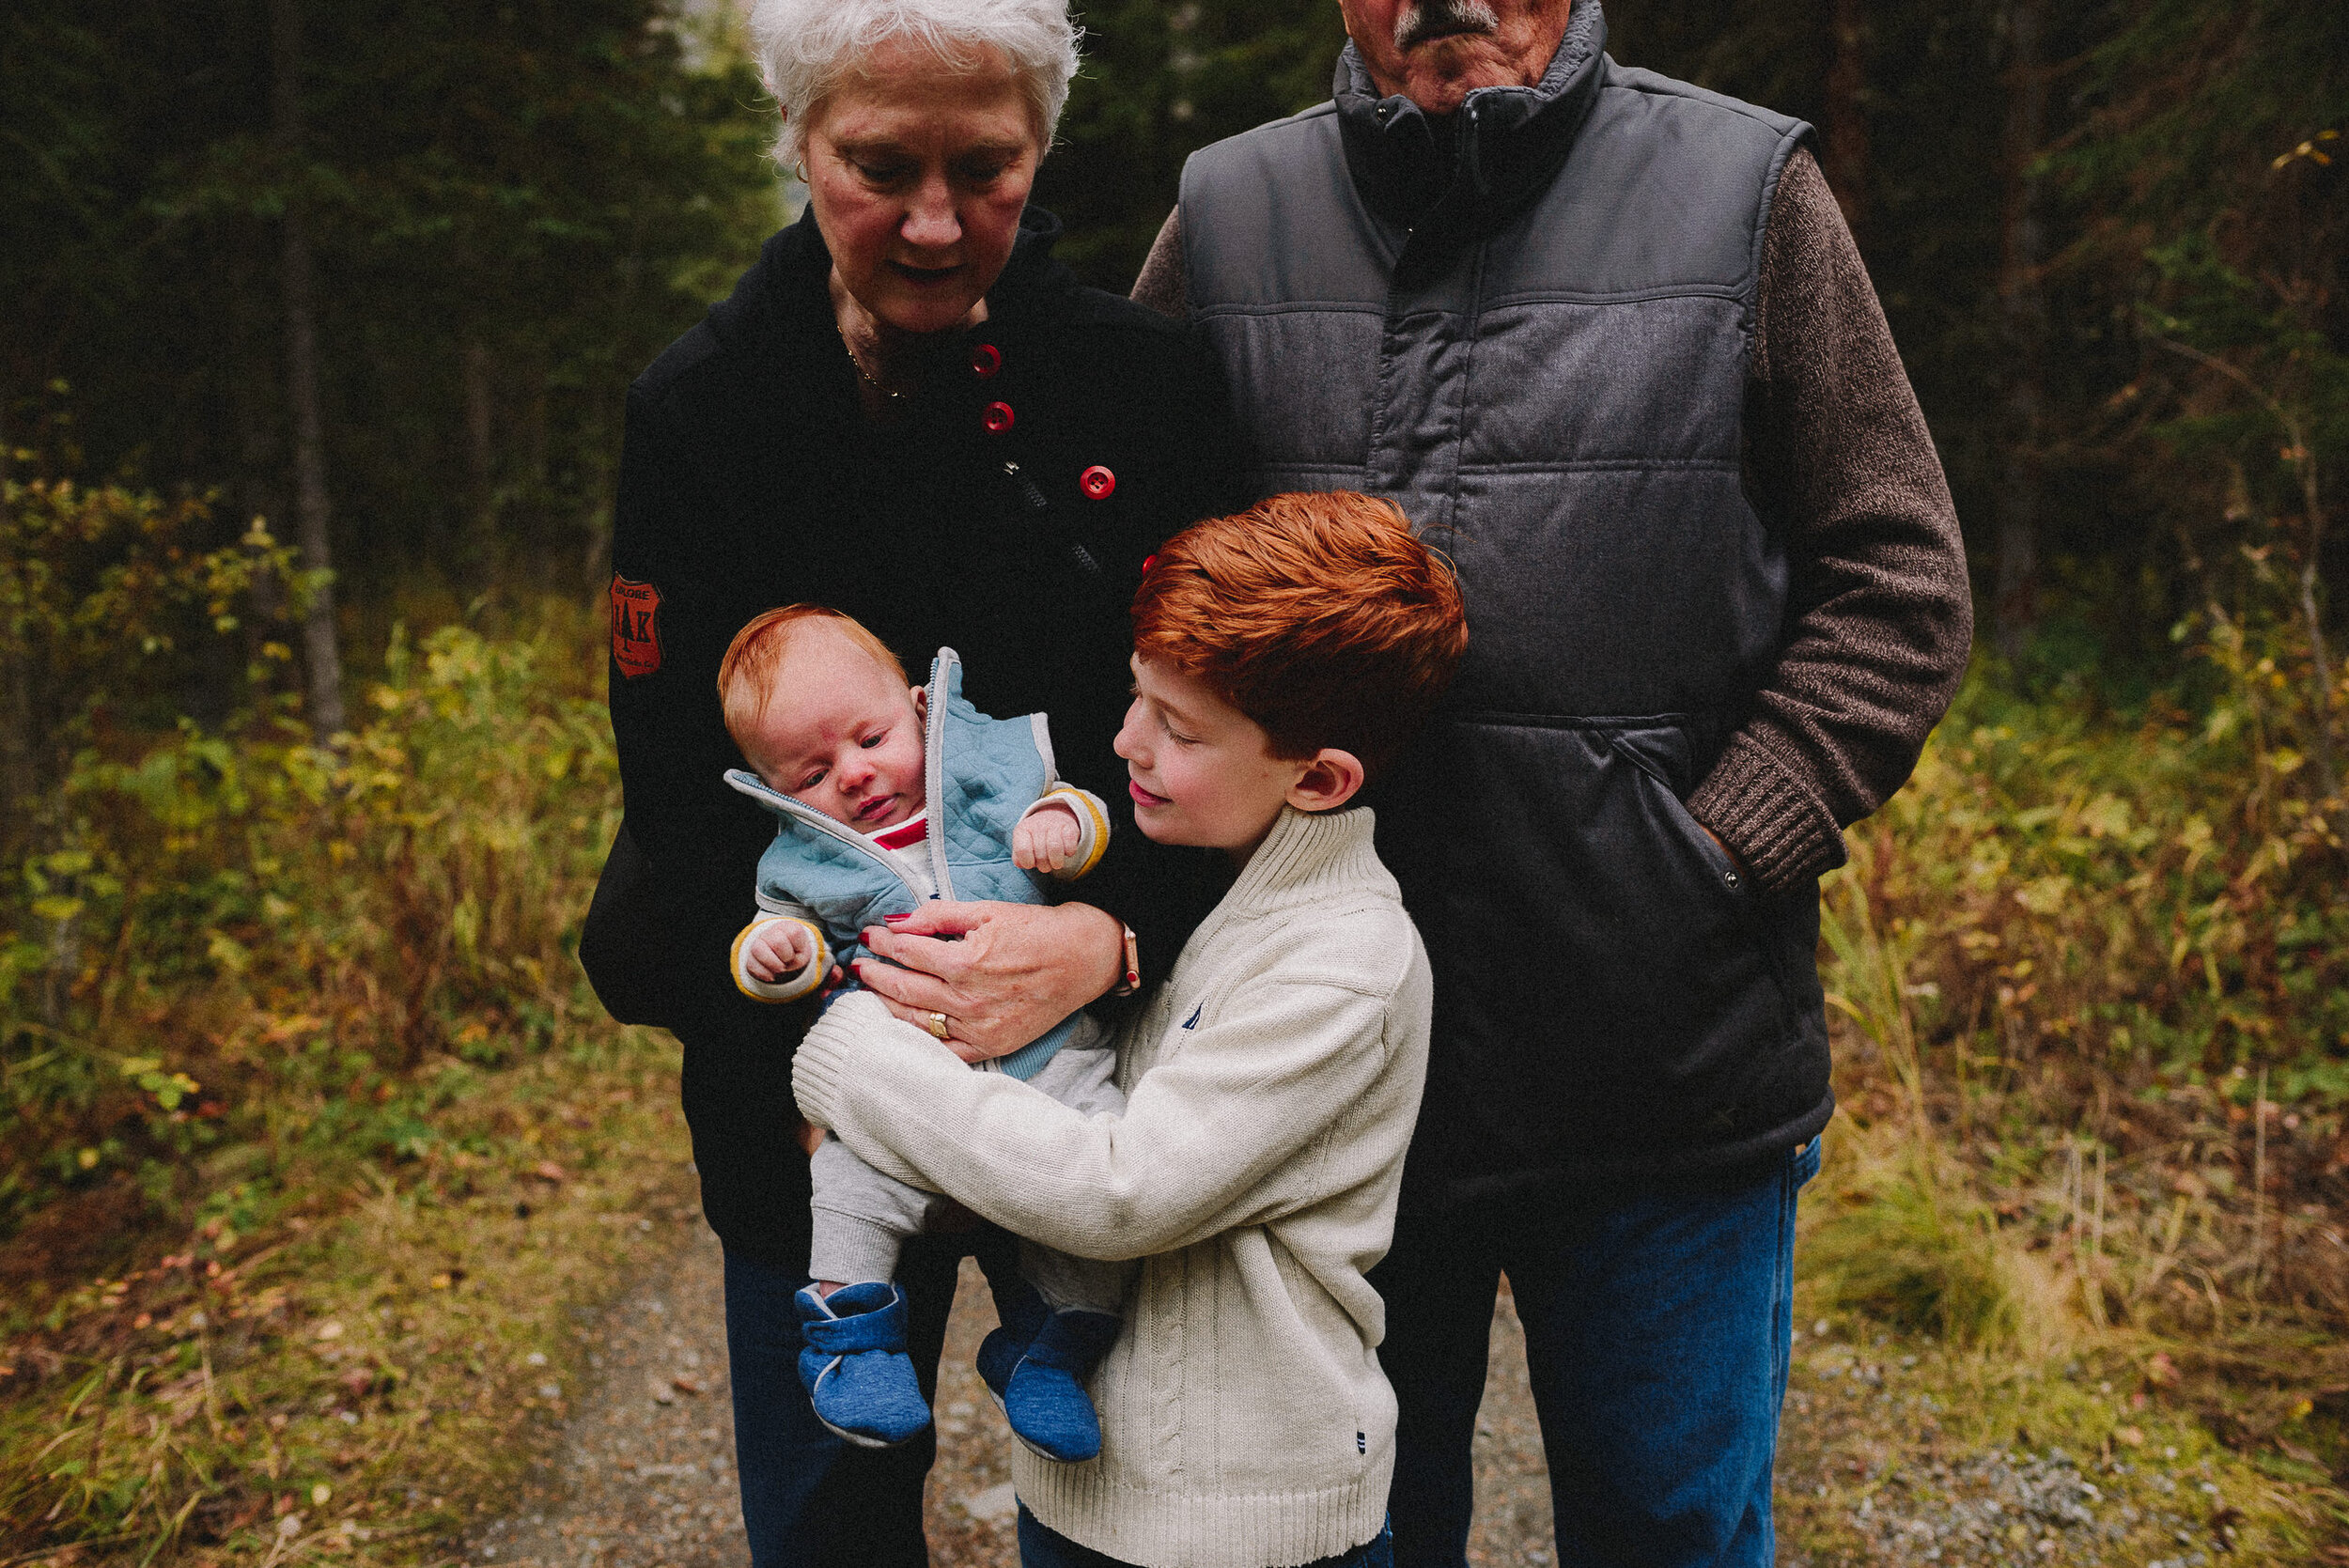 north-fork-eagle-river-fall-family-session-alaska-photographer-way-up-north-photography (139).jpg